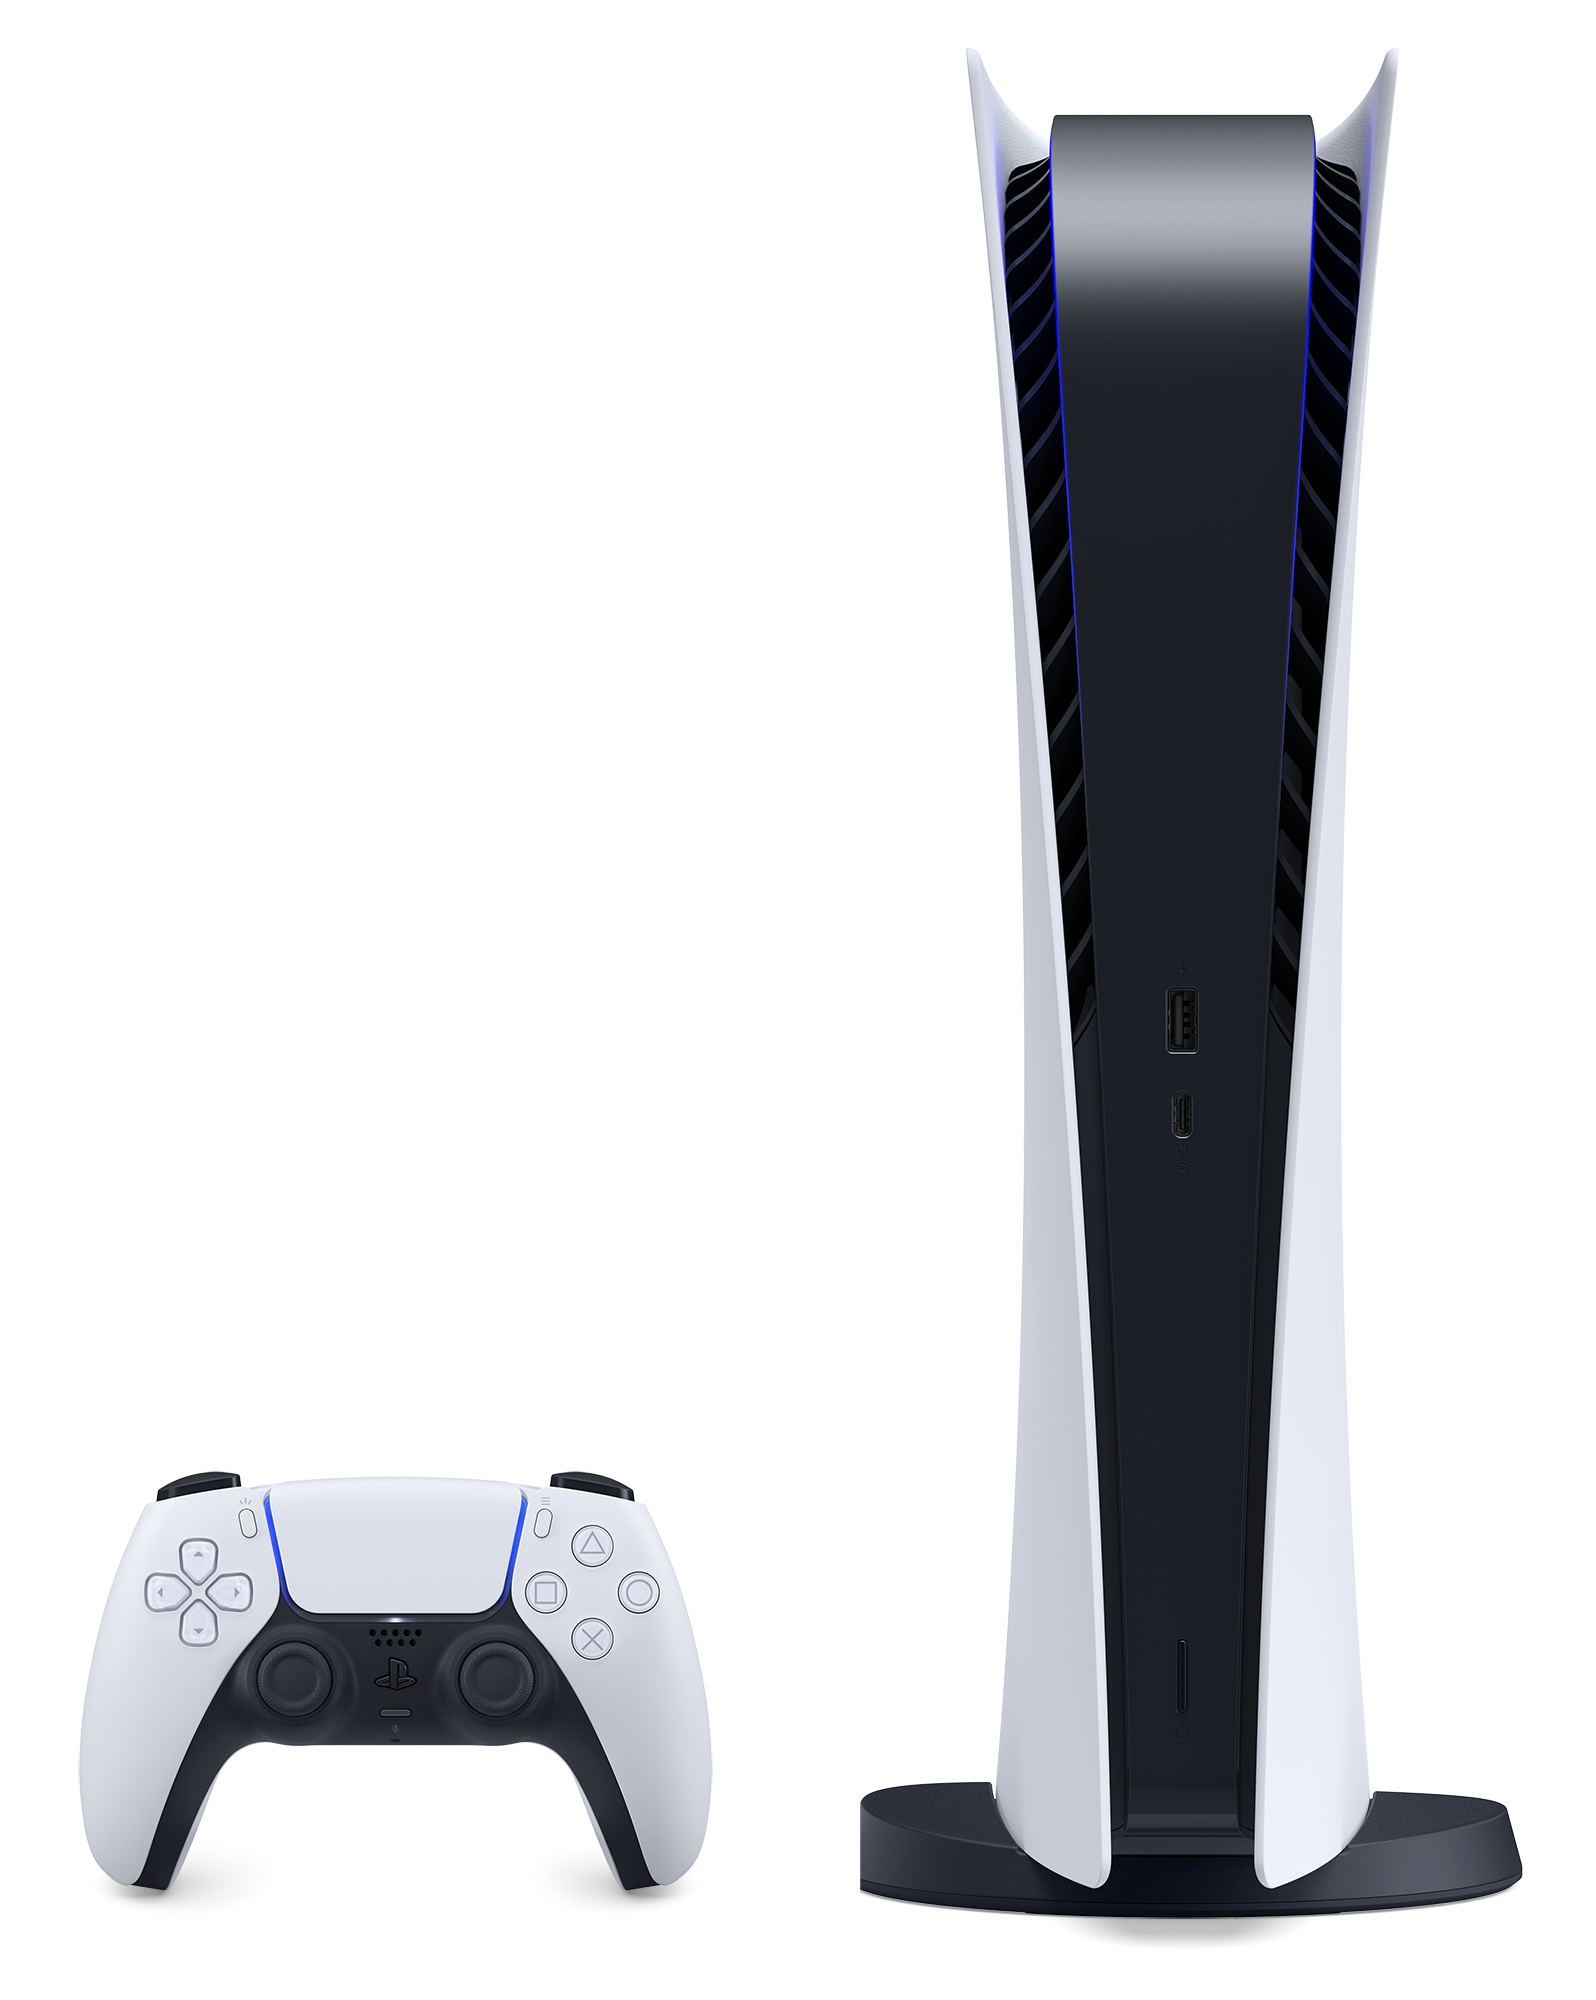 PlayStation 5 Console - Vertical Product Shot